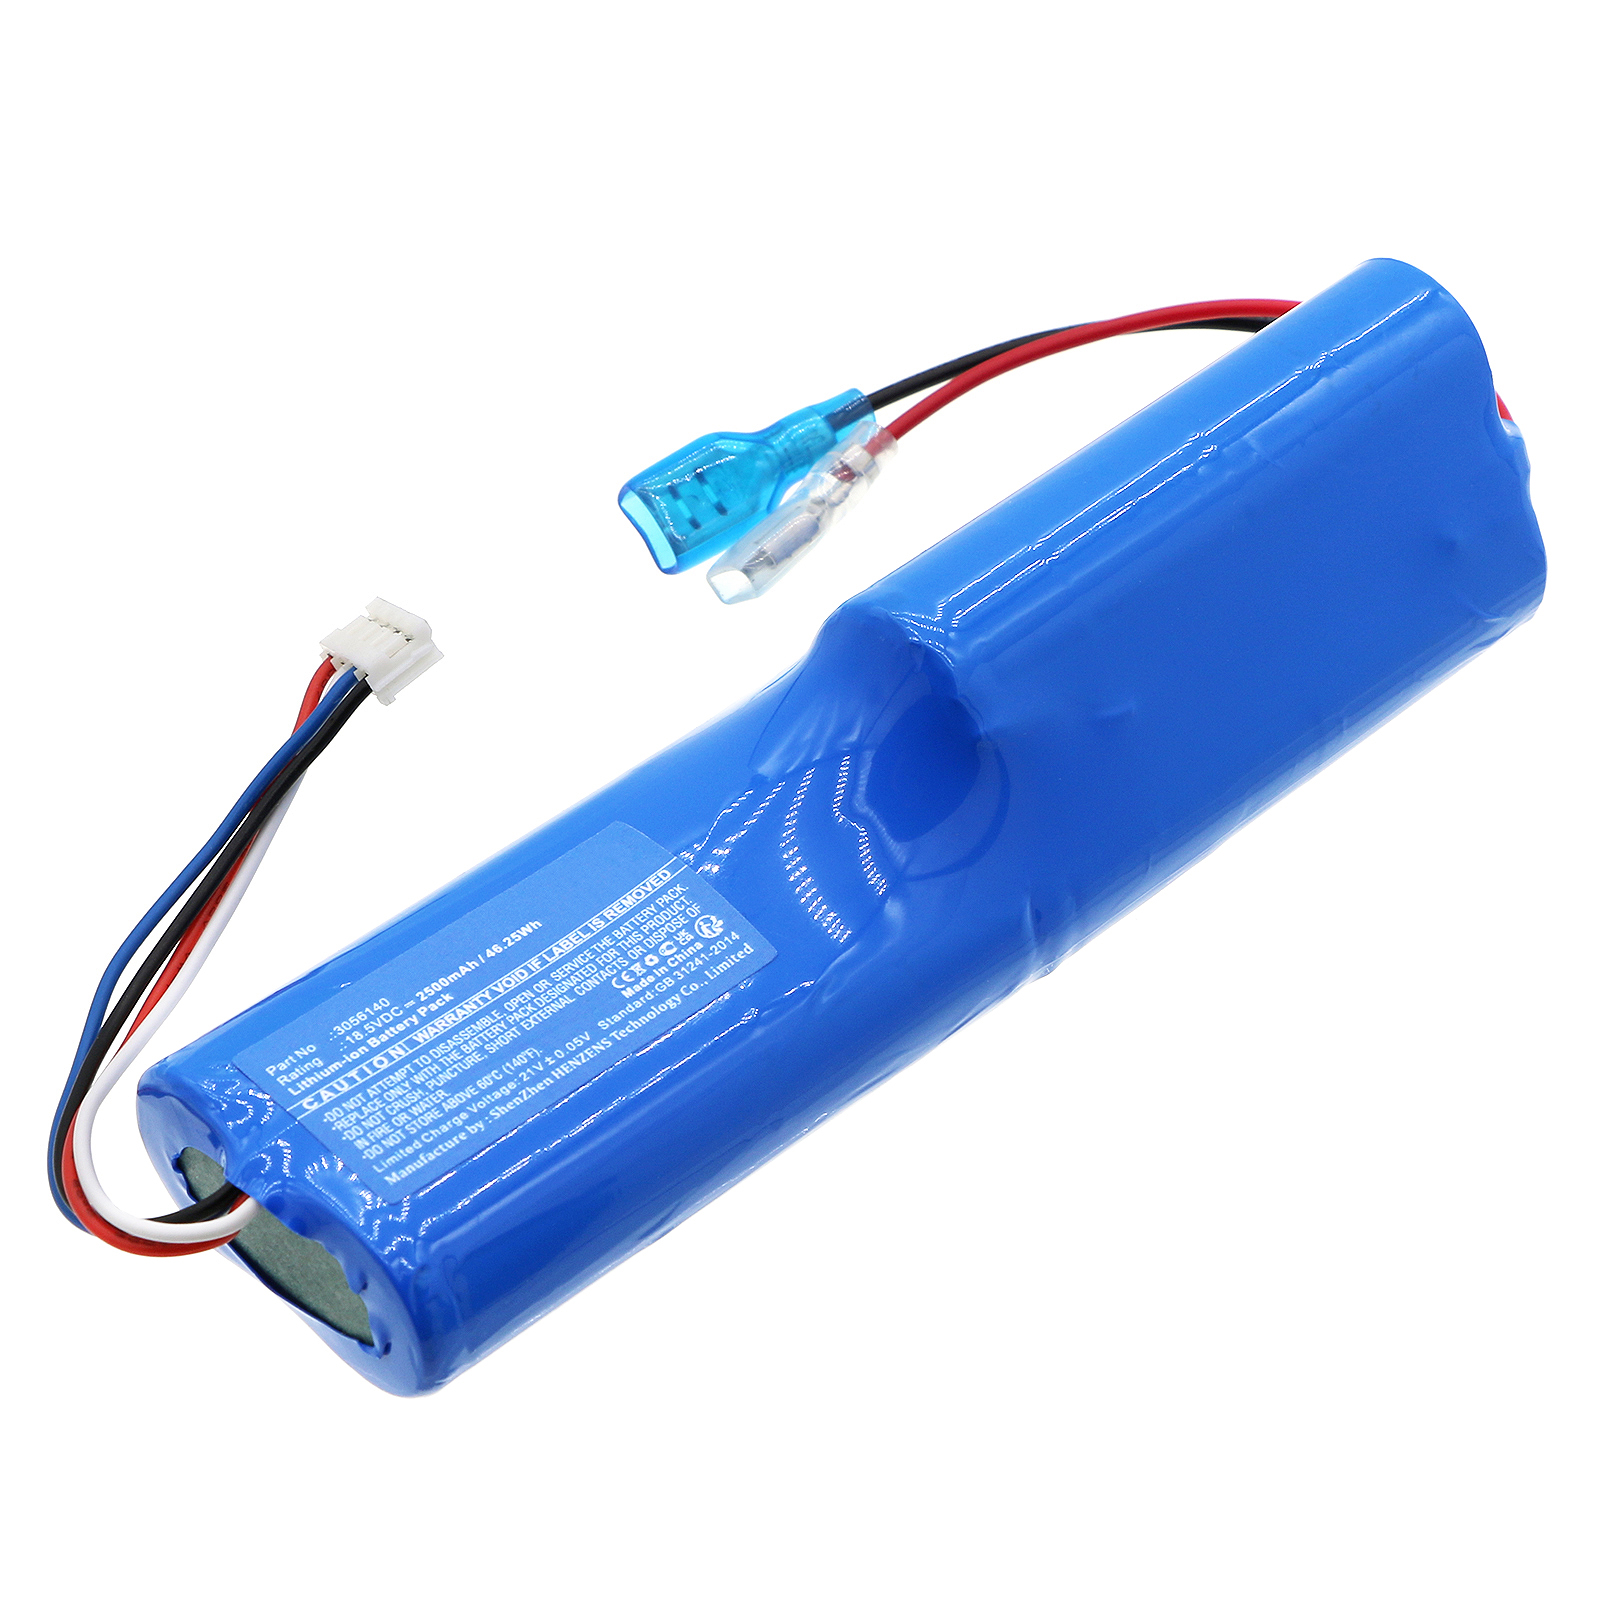 Batteries for FakirVacuum Cleaner